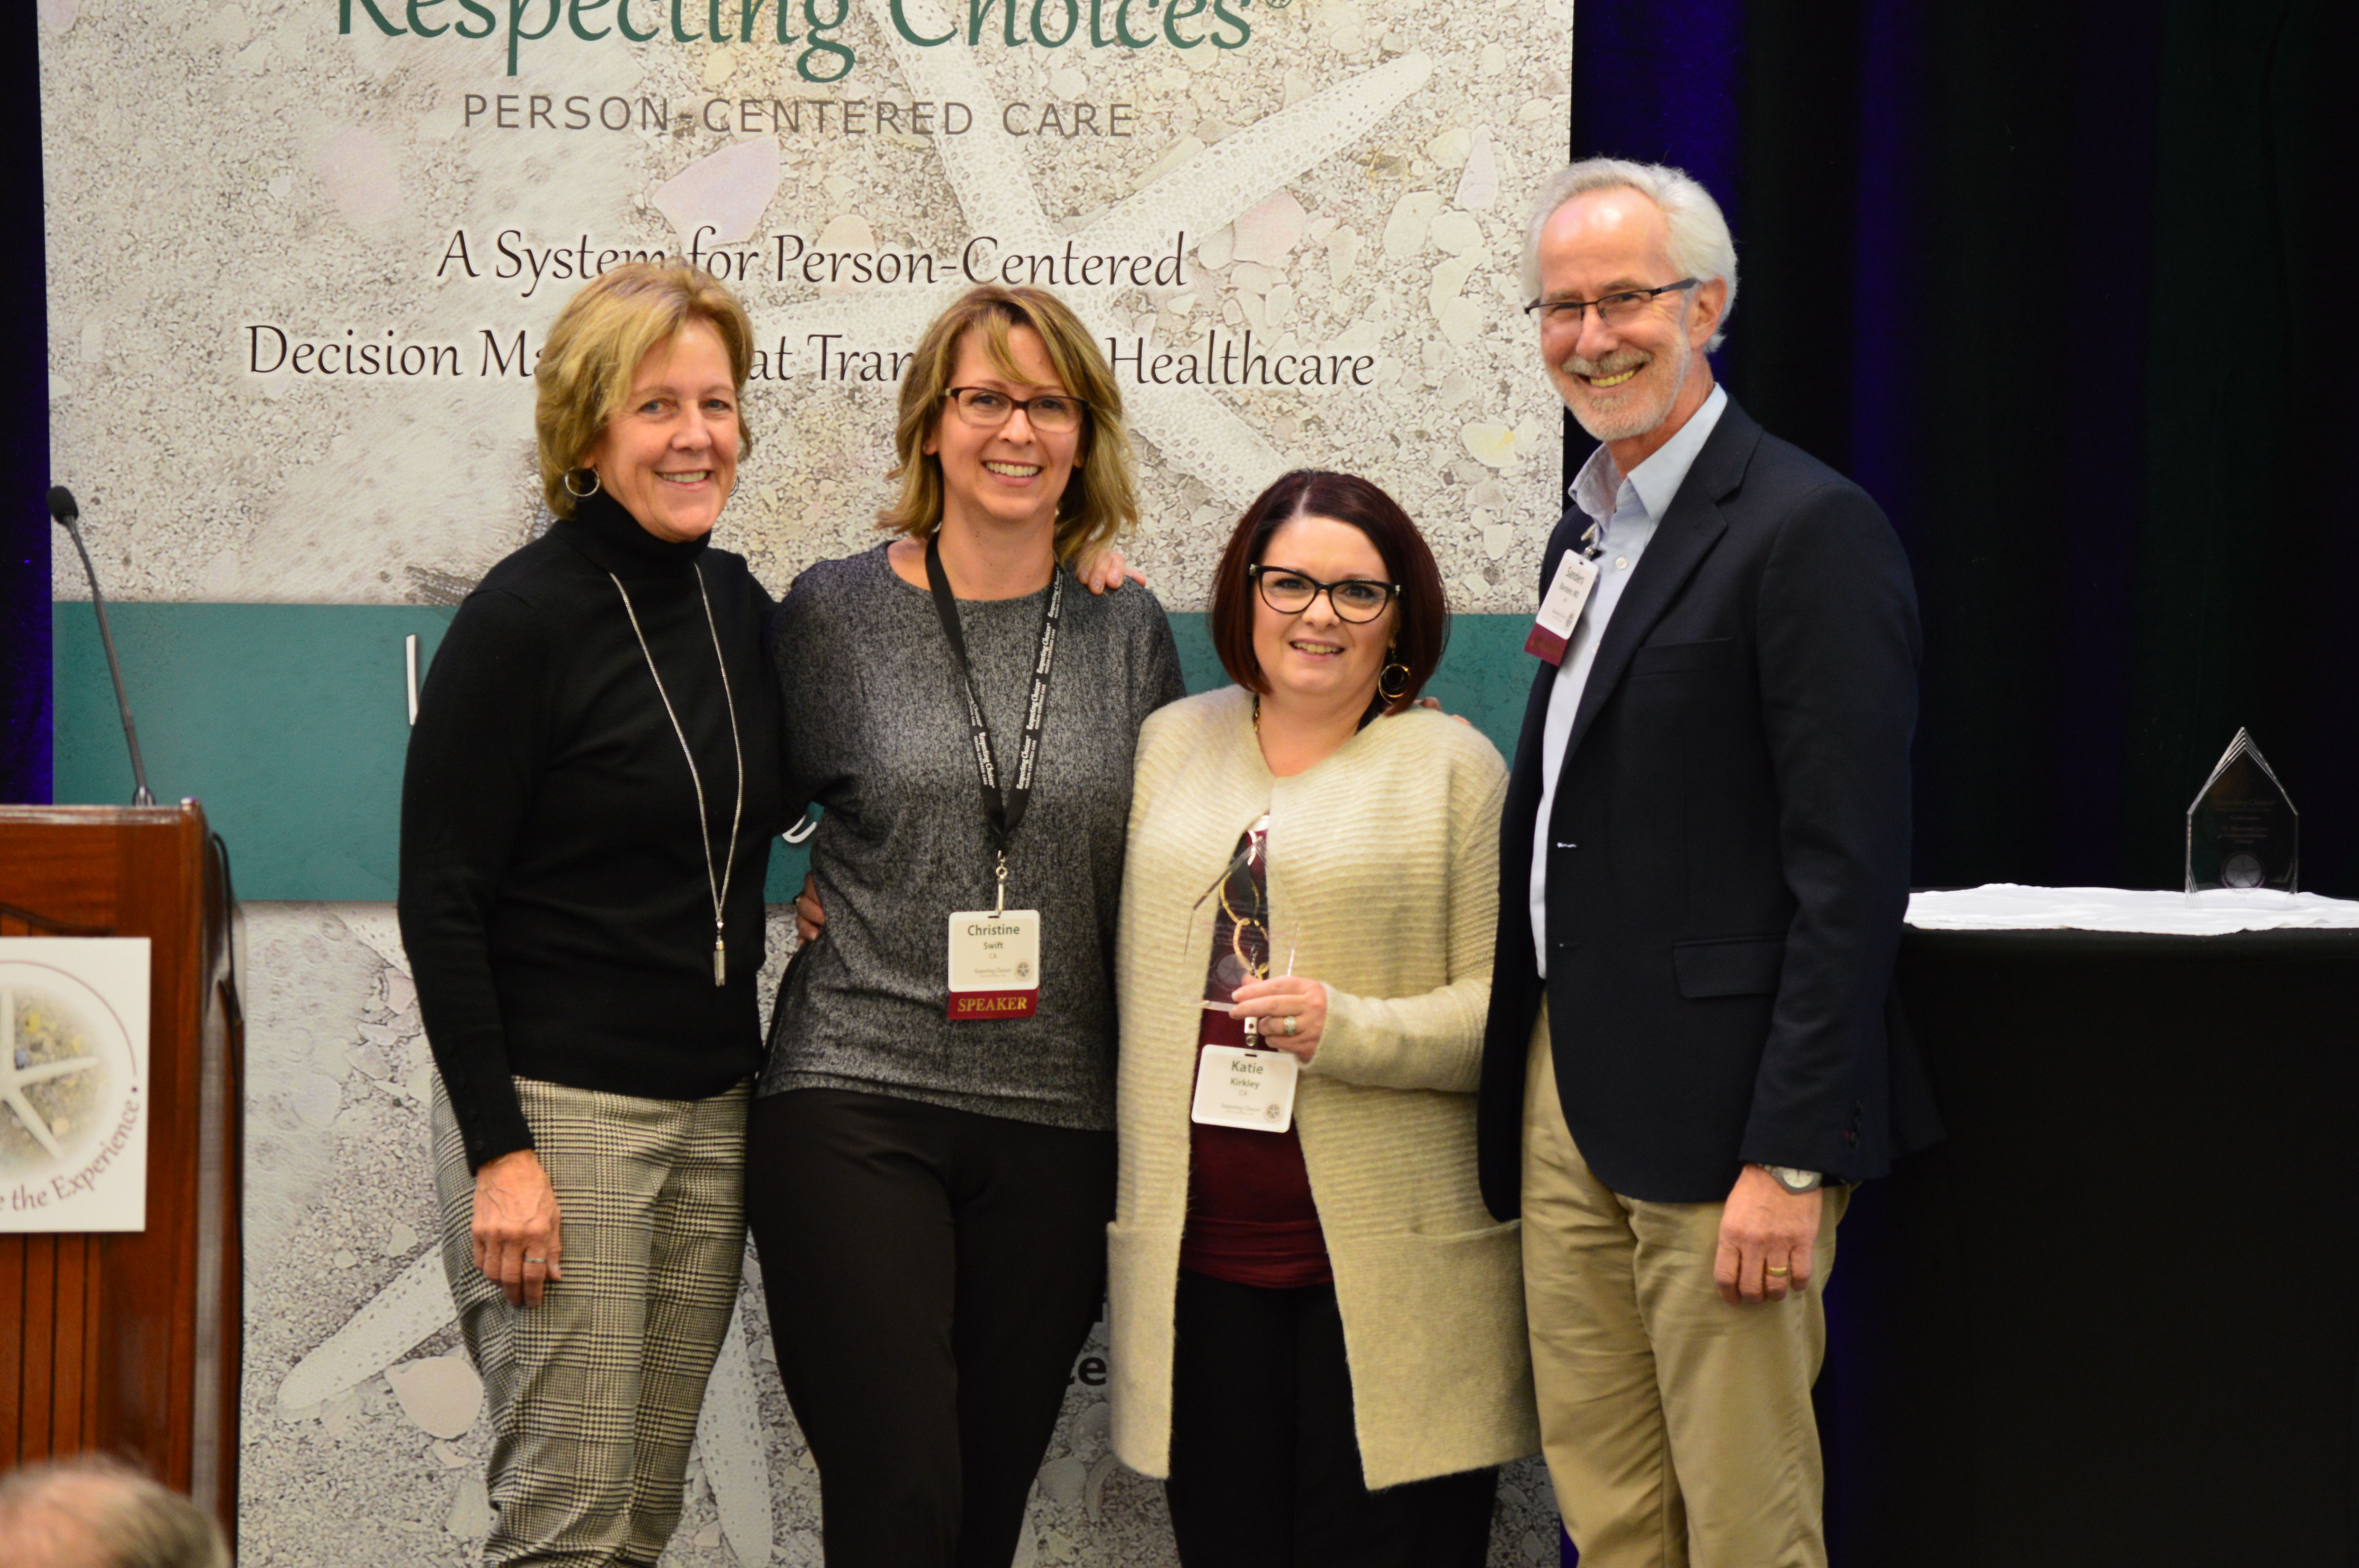 Excellence and Innovation in Community Engagement - Recipient: Community Regional Medical Centers’ Respecting Life Choices Team | Pictured from L-R: Linda Briggs (RC), Christine Swift, Katie Kirkley , Sanders Burstein (RC)